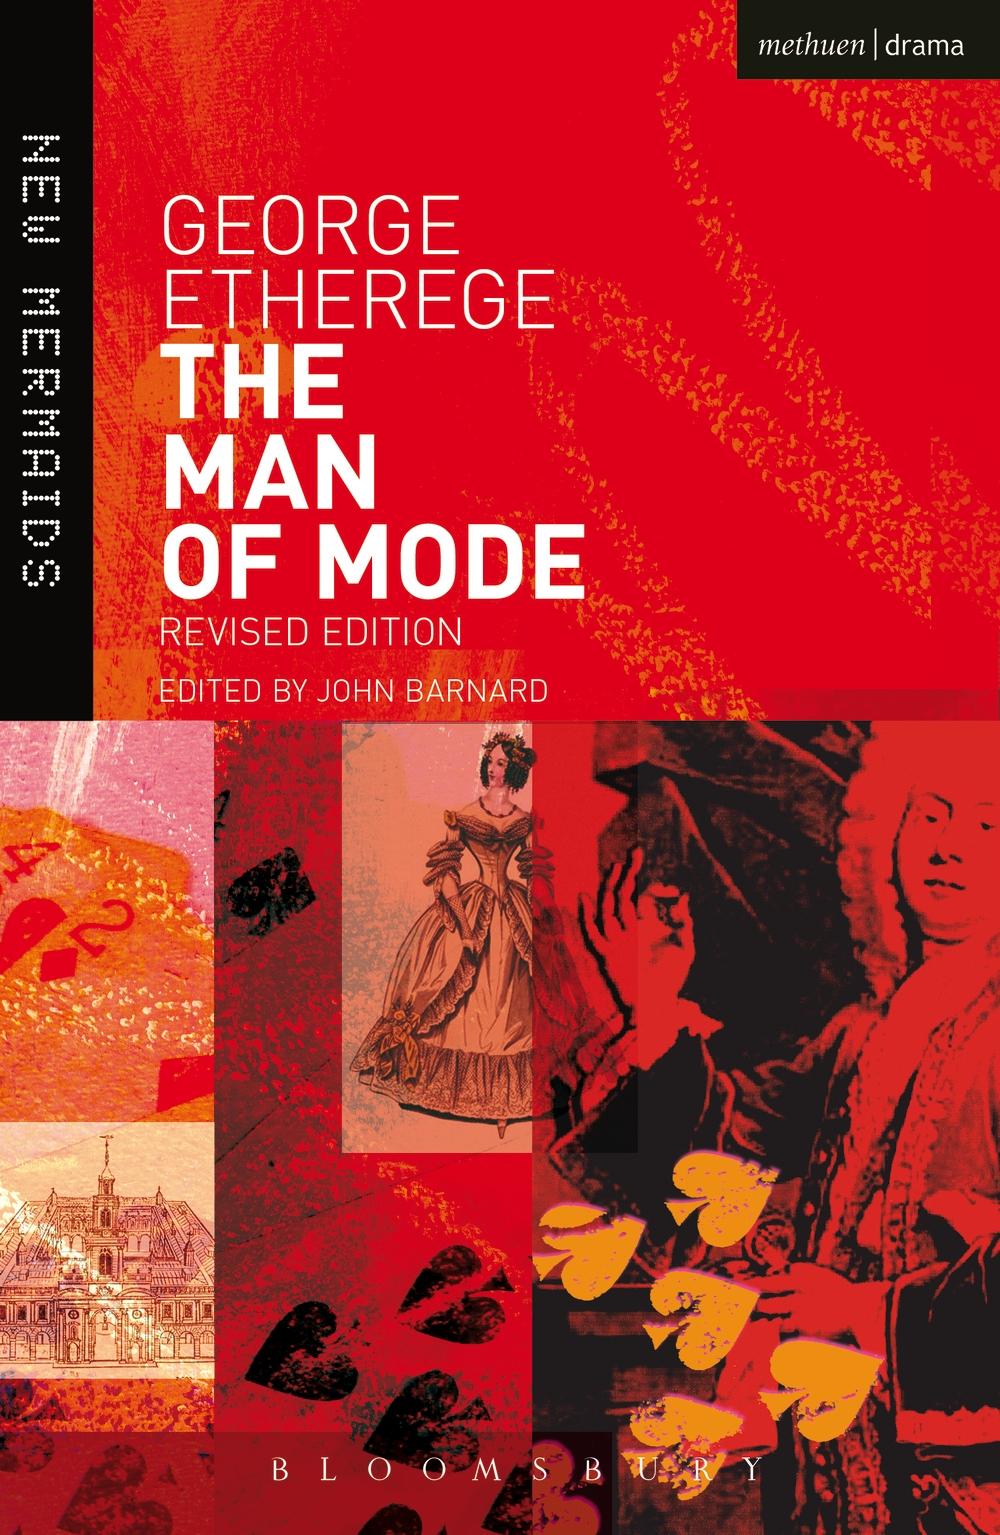 The "Man of Mode"